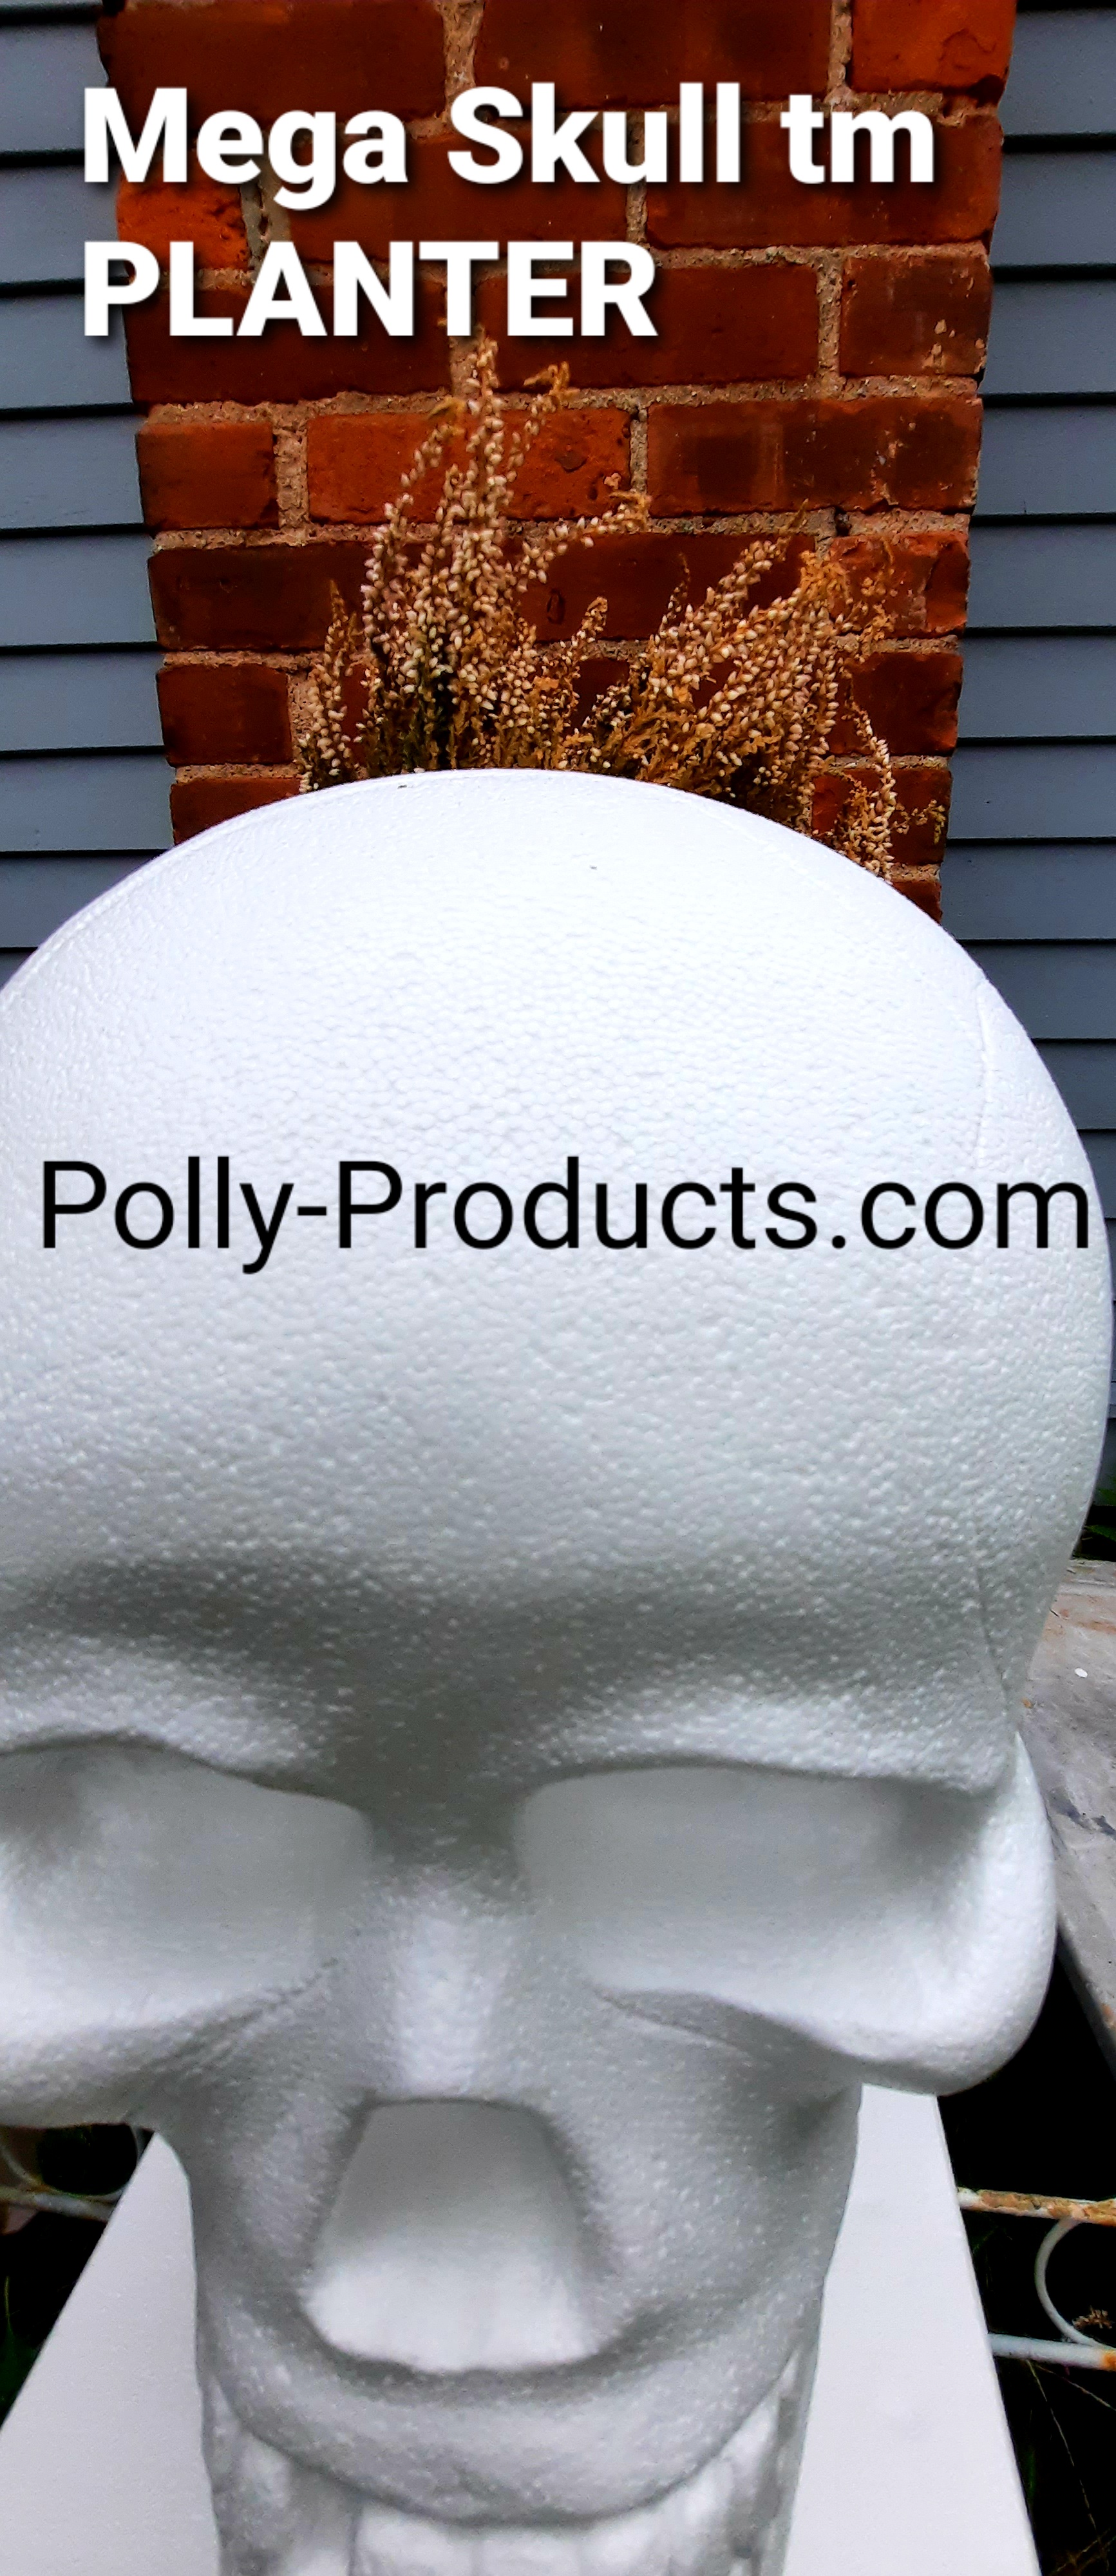 MEGA-SKULL tm PLANTER BY POLLY PRODUCTS COMPANY. MADE IN THE USA. 20"H X 12" W #SKULL-PL 